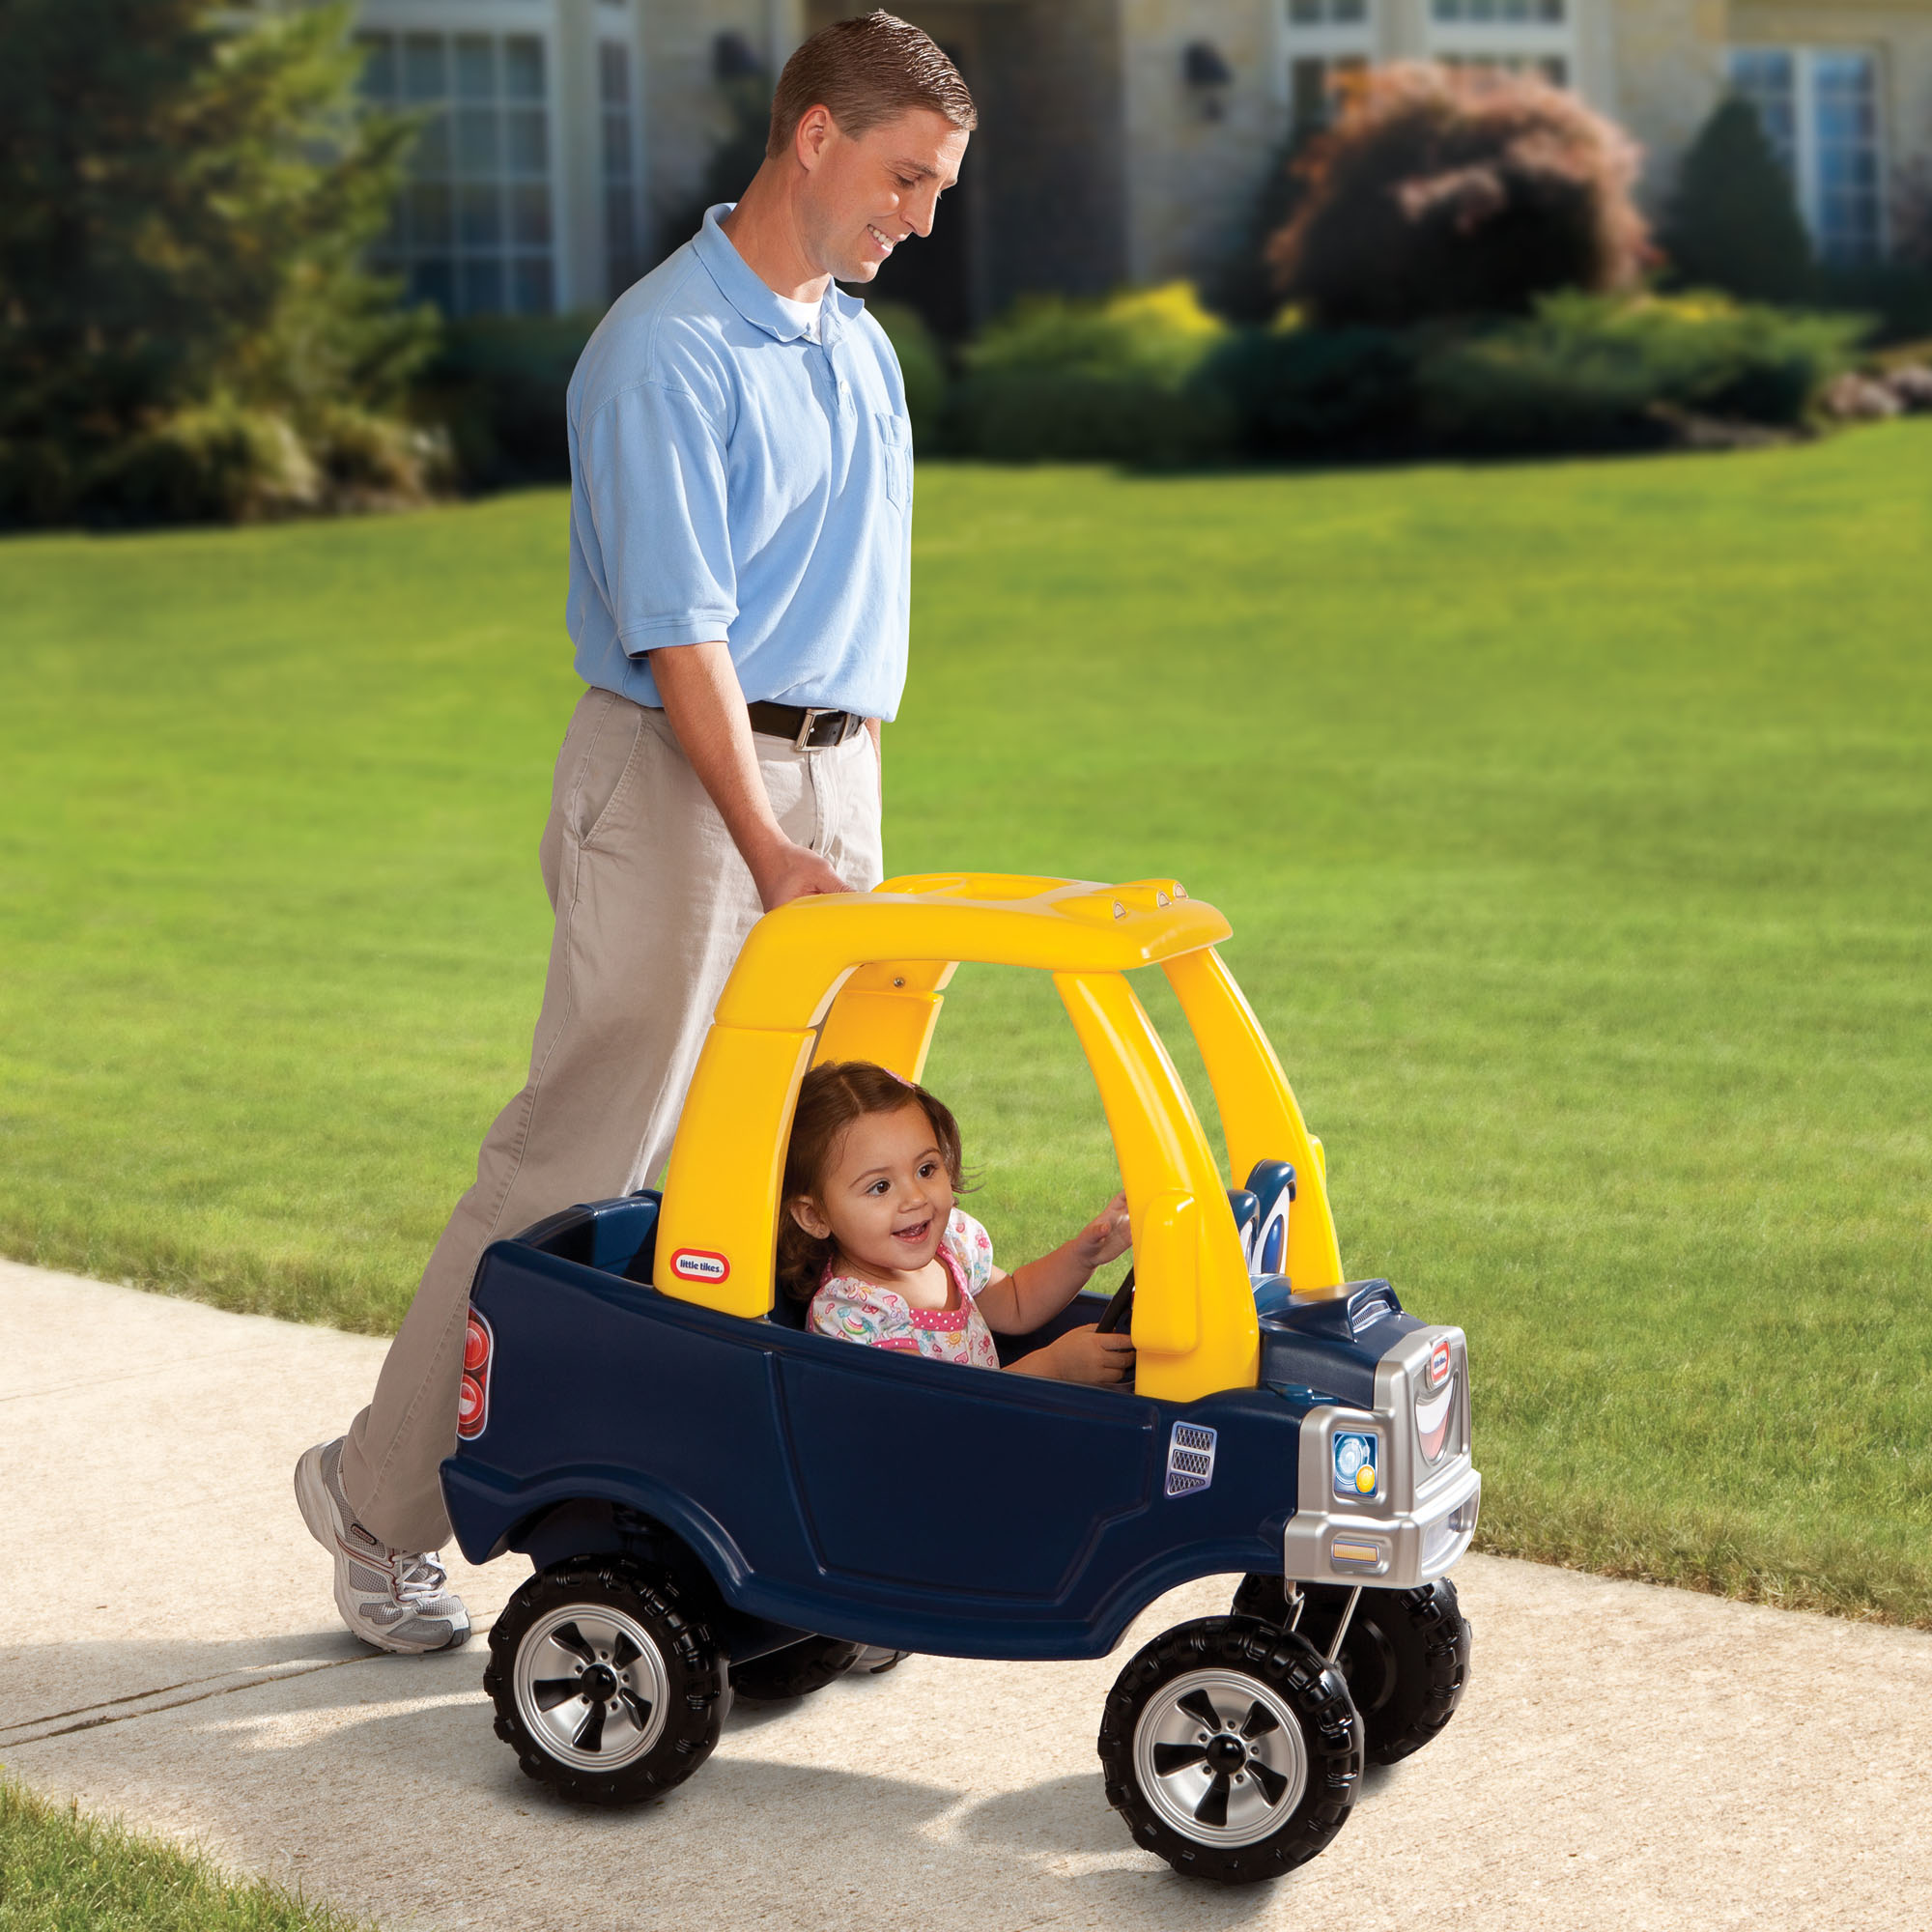 Little Tikes Cozy Truck Ride-on with Removable Floorboard, 18 Months to 5 Years - image 4 of 9